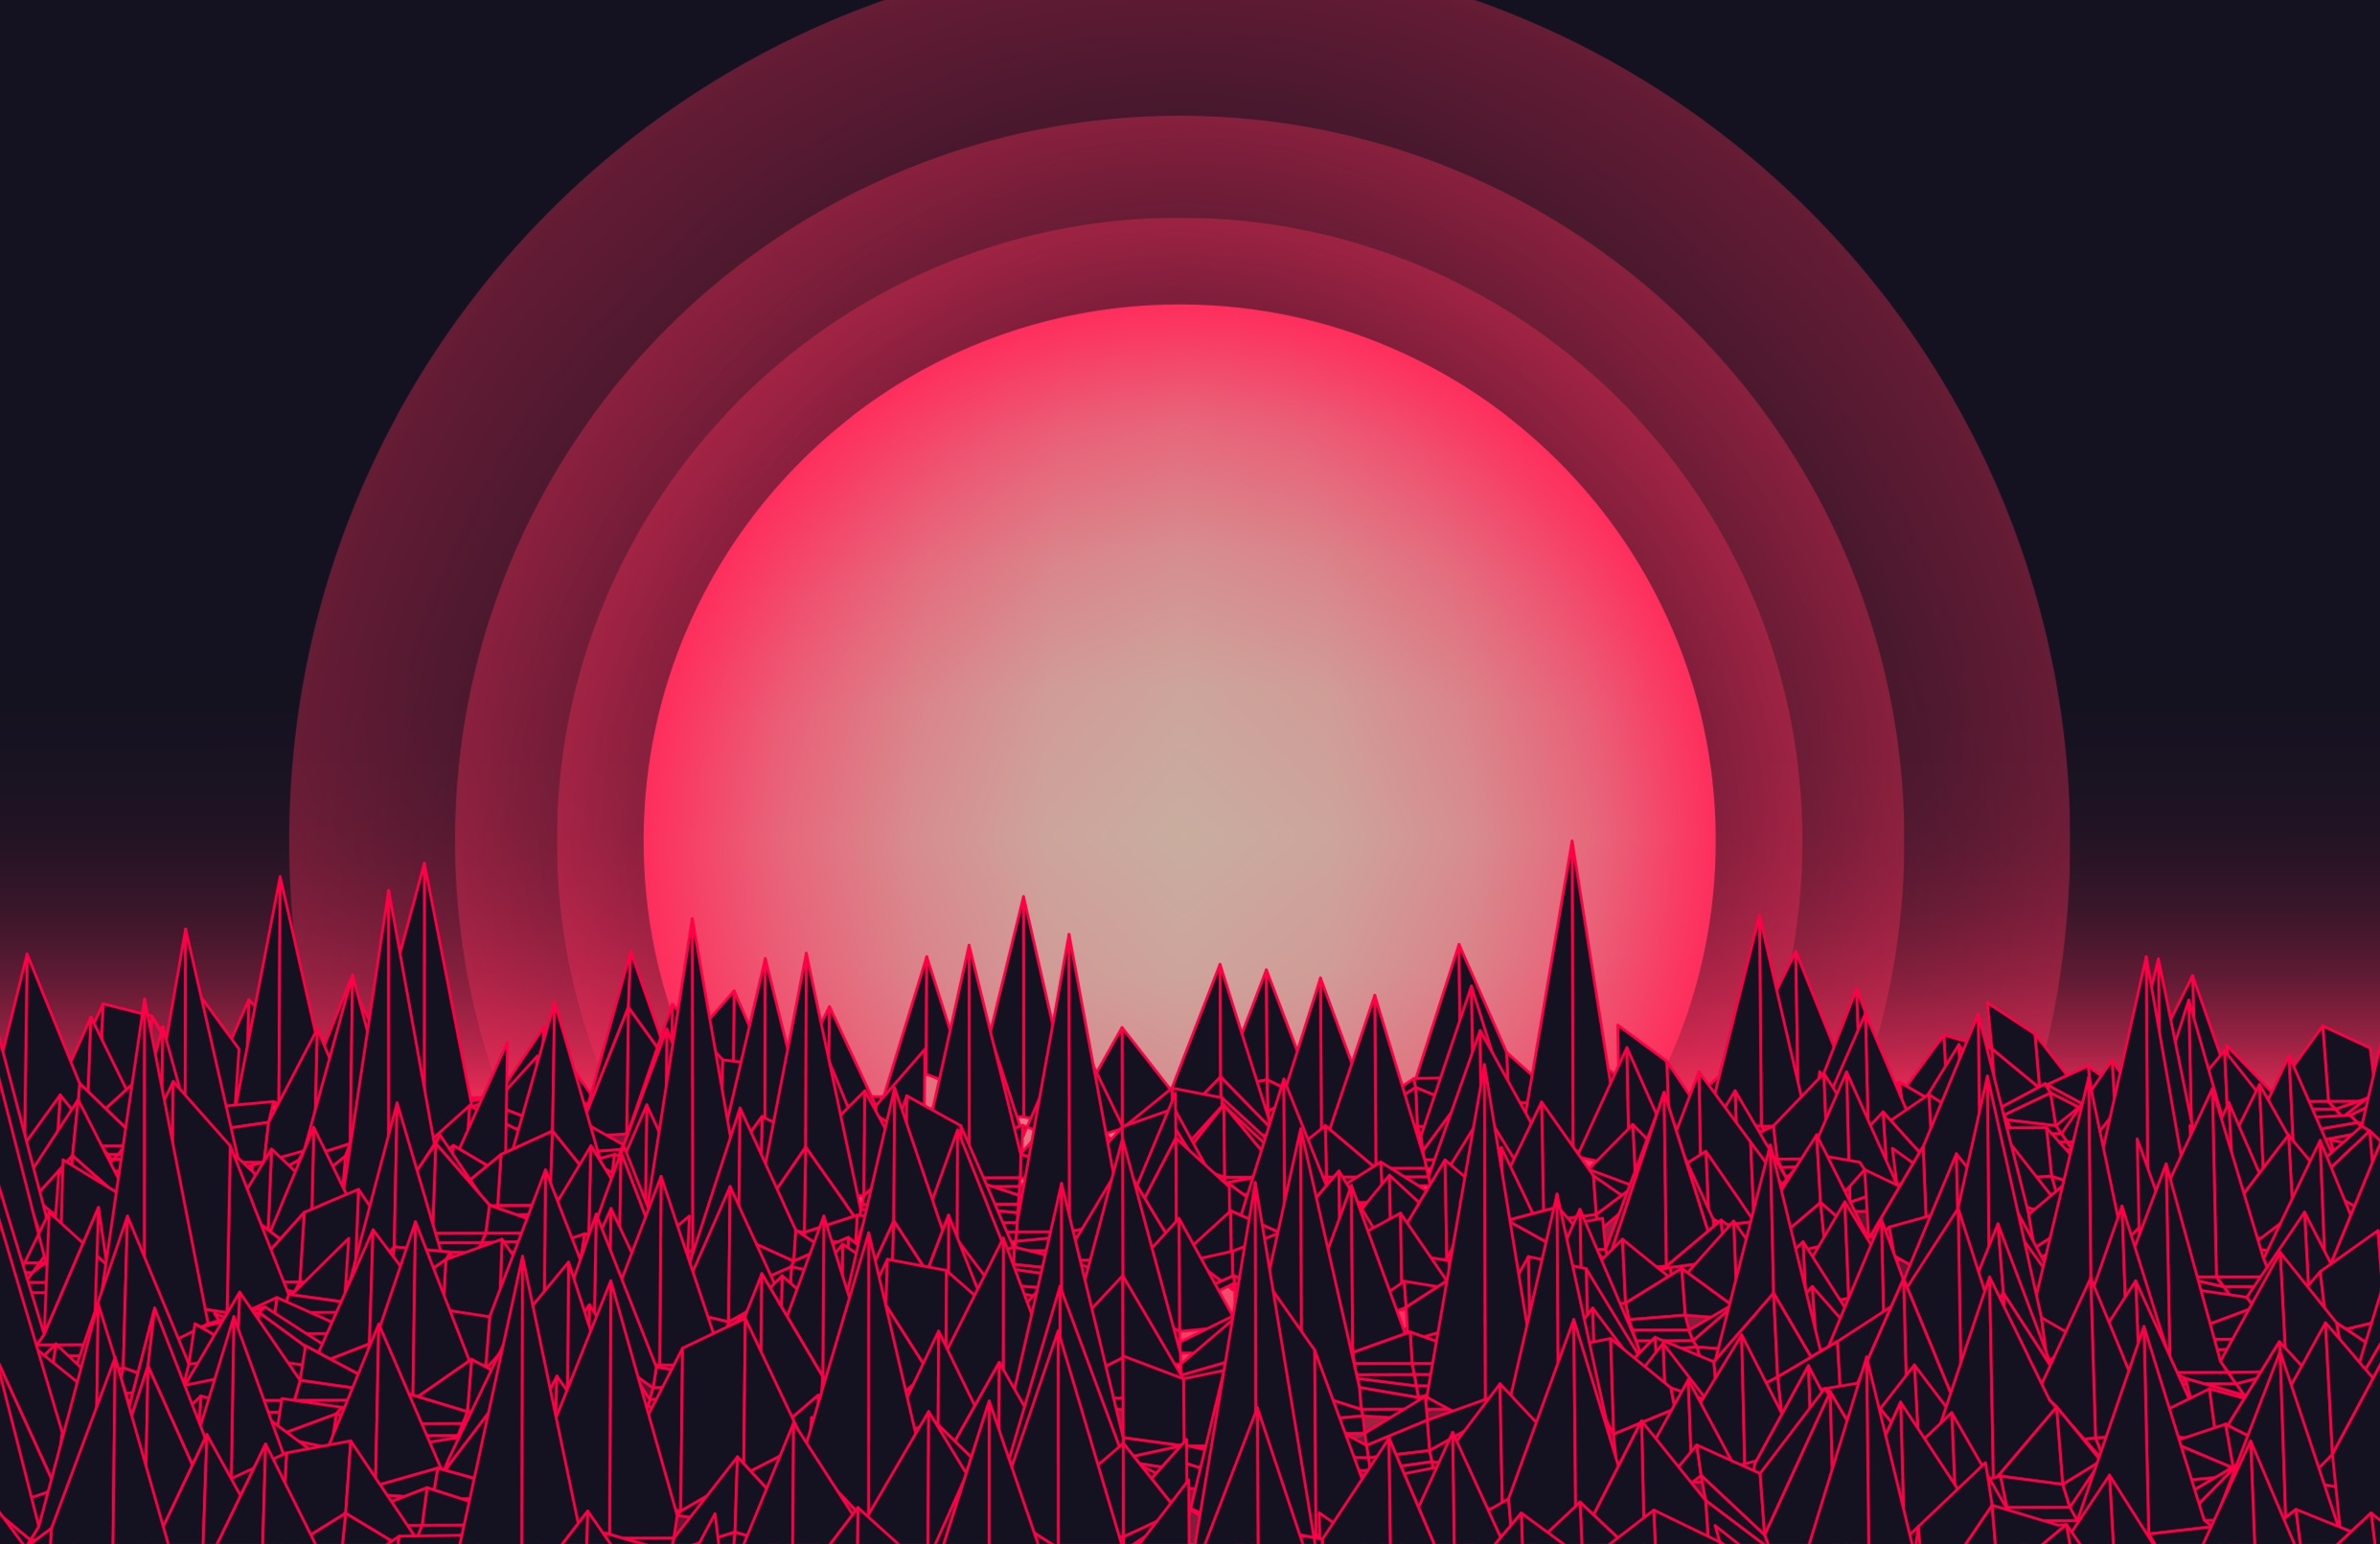 Retro Style Synthwave Artwork Digital Art Synth Red Abstract 2484x1611